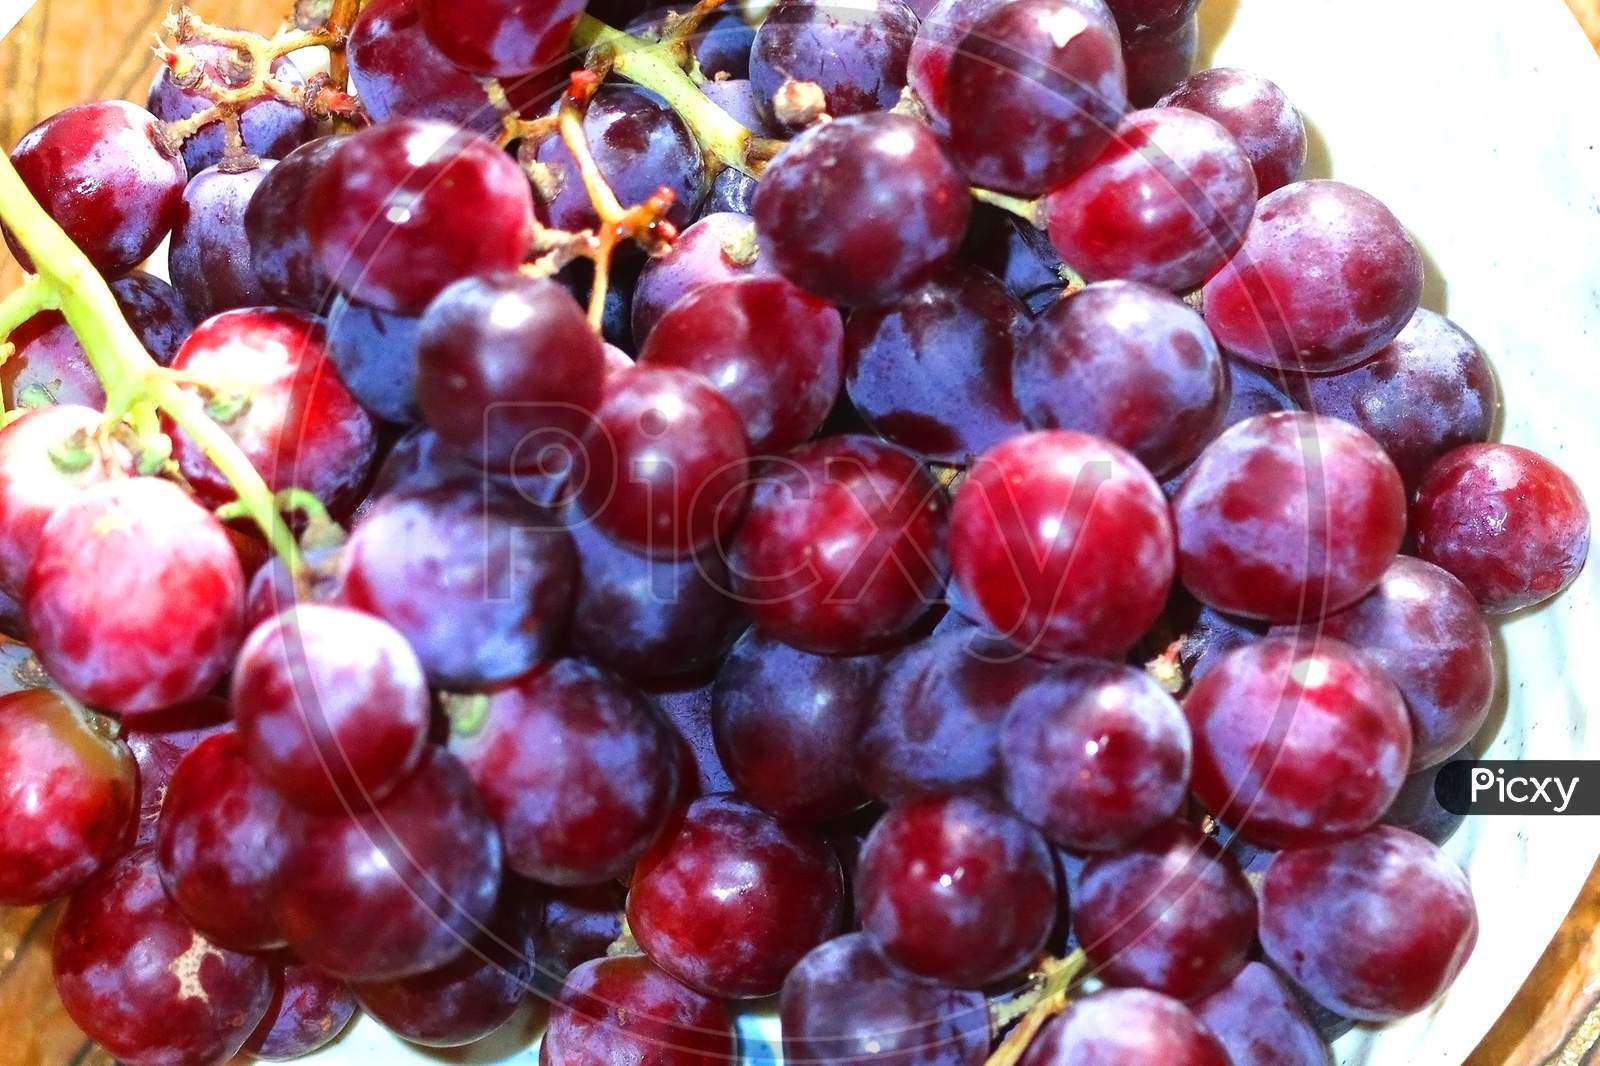 Healthy fruits Red wine grapes background dark grapes blue grapeswine grapes,Red wine grapes backgrounddark grapes,blue grapes,Red Grape in a supermarket local market bunch of grapes ready to eat